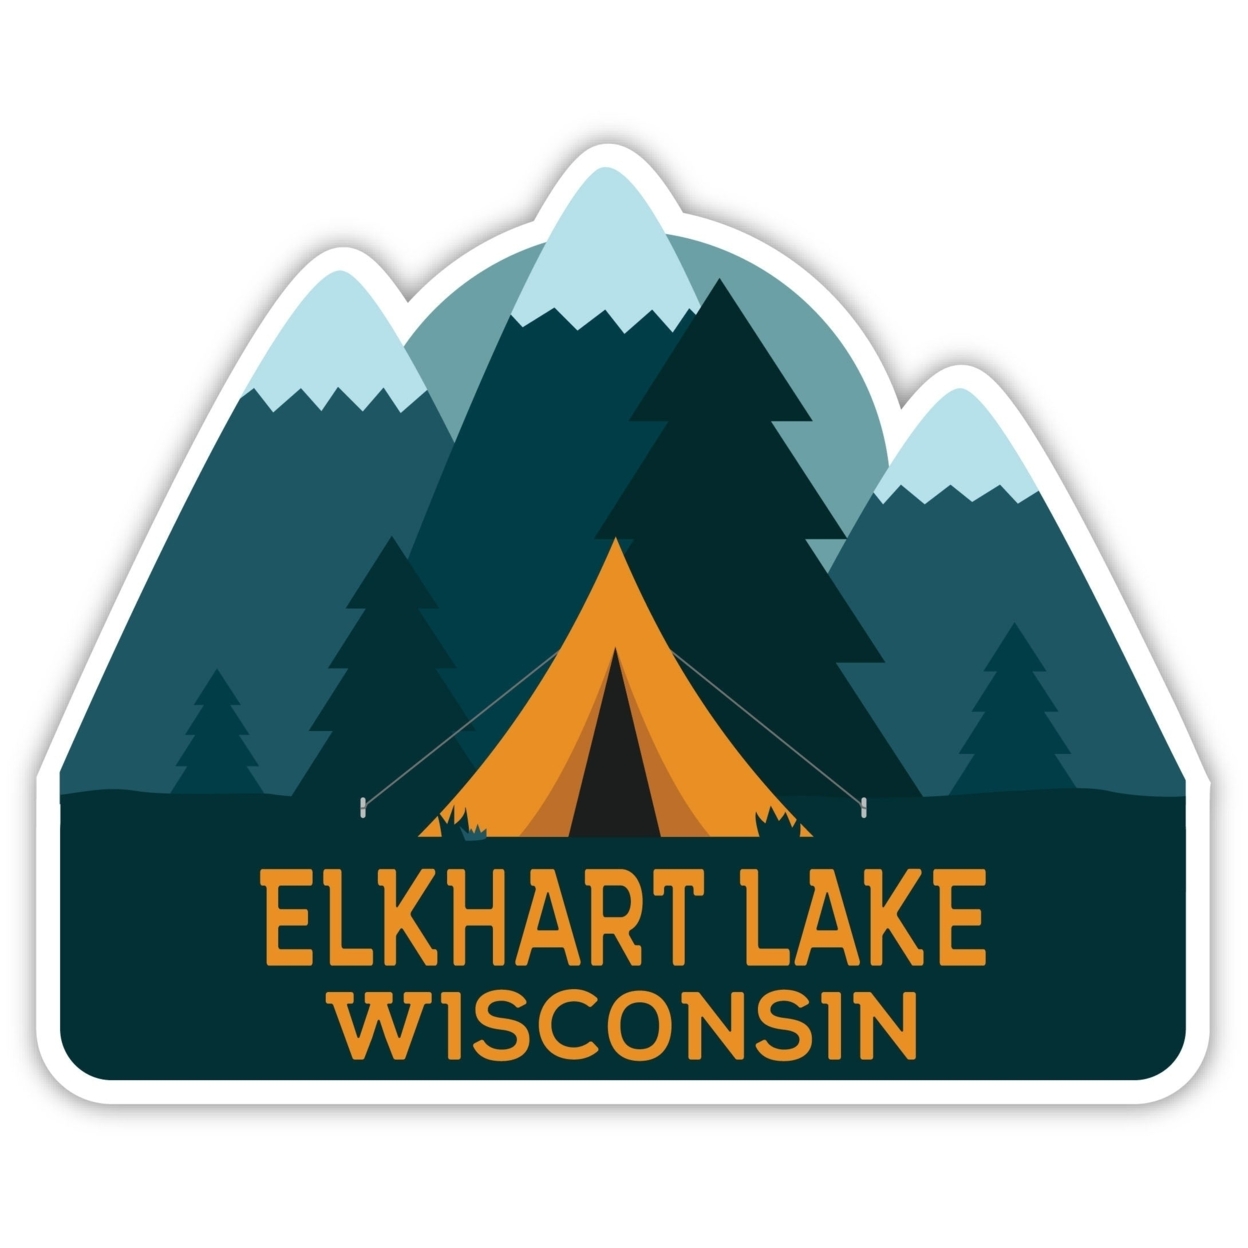 Elkhart Lake Wisconsin Souvenir Decorative Stickers (Choose Theme And Size) - 4-Pack, 8-Inch, Tent